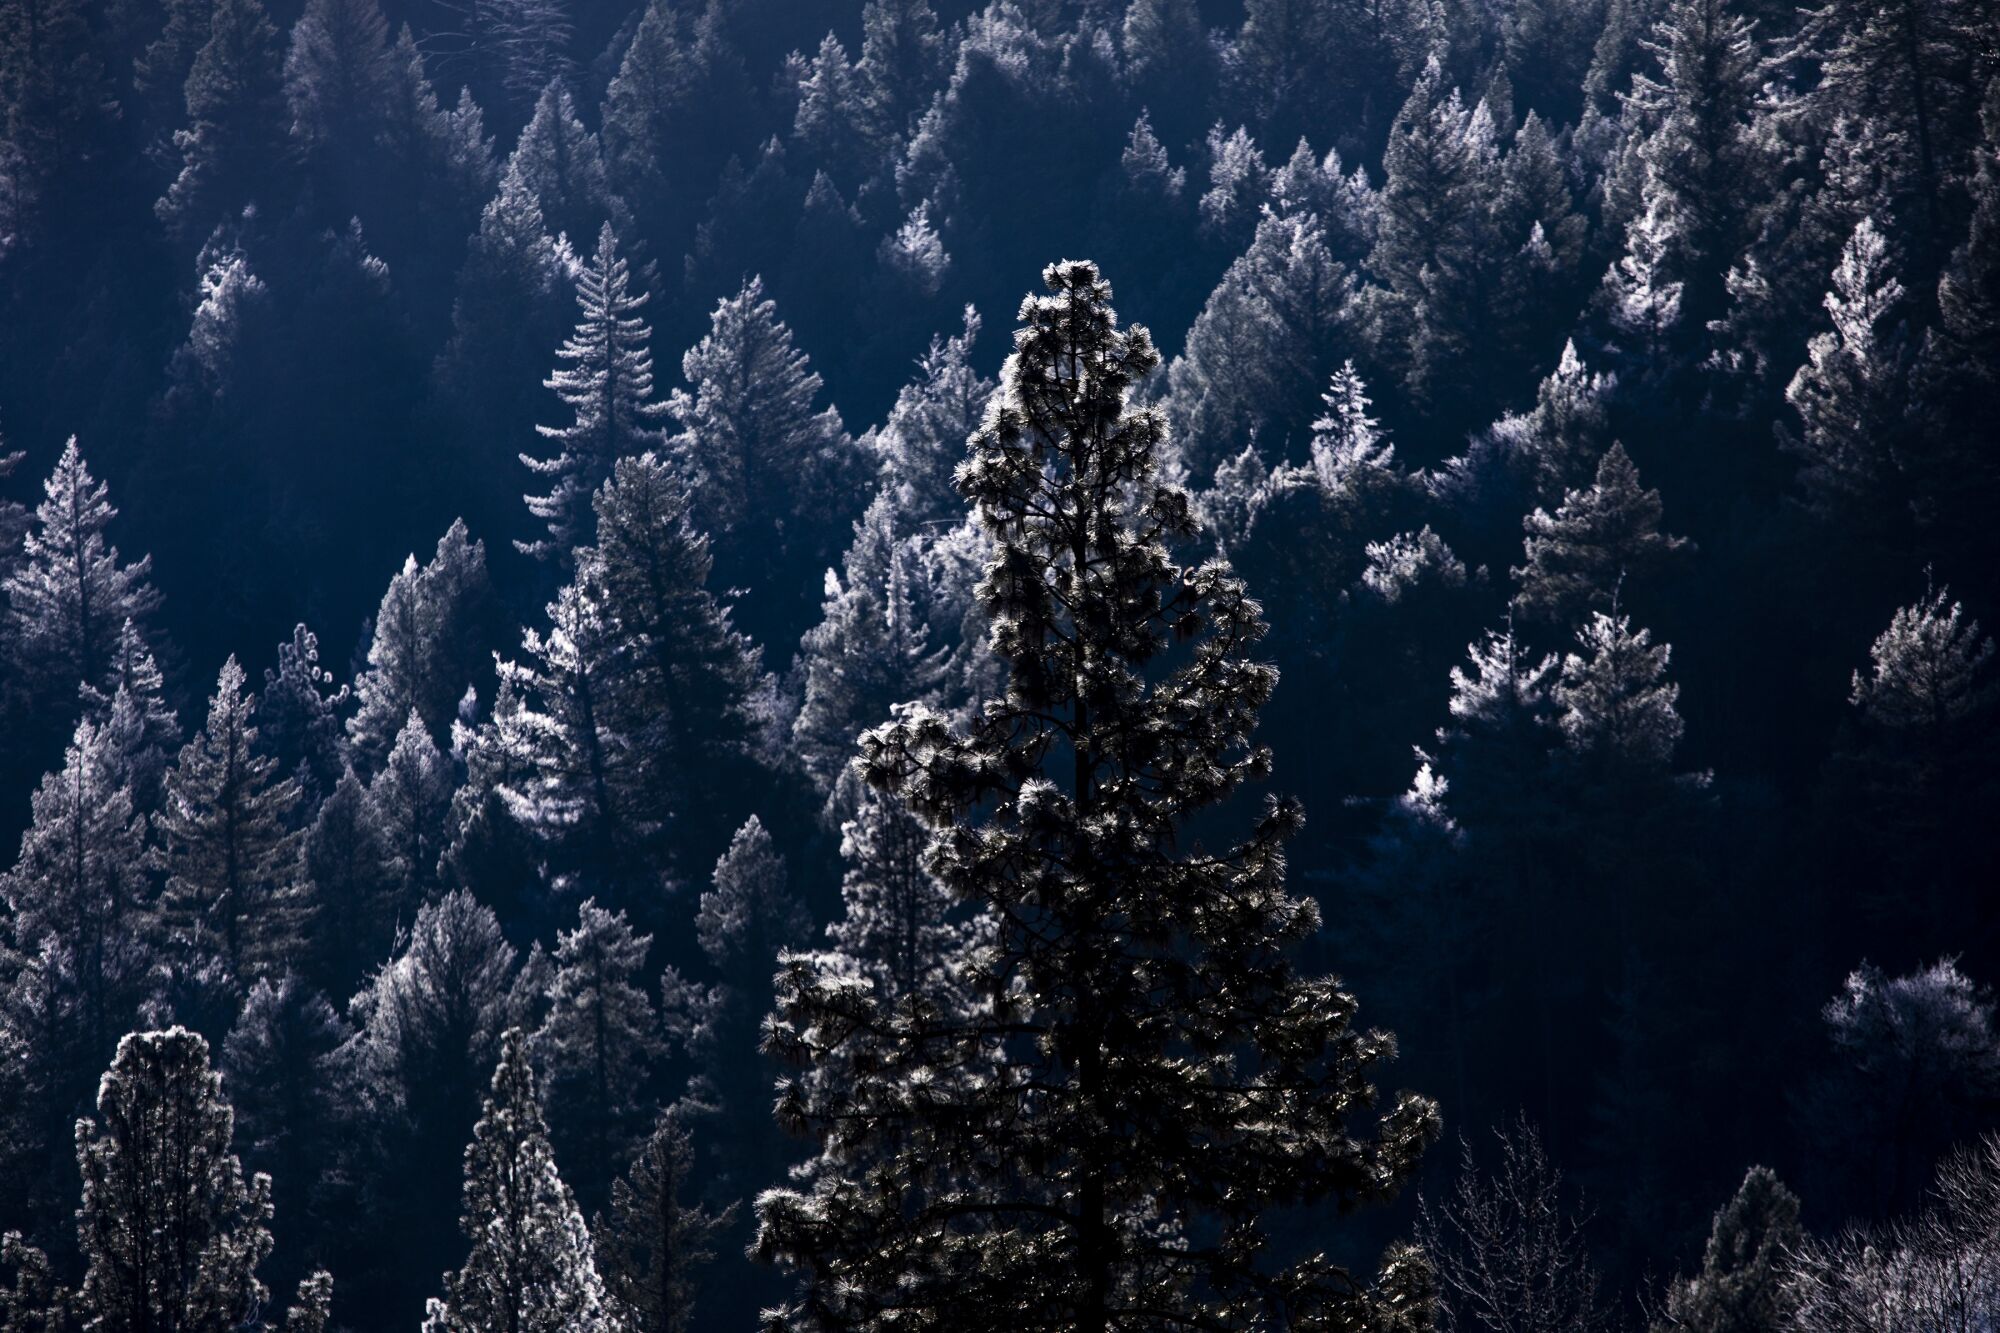 Morning frost clings to forest trees in the Trinity Alps